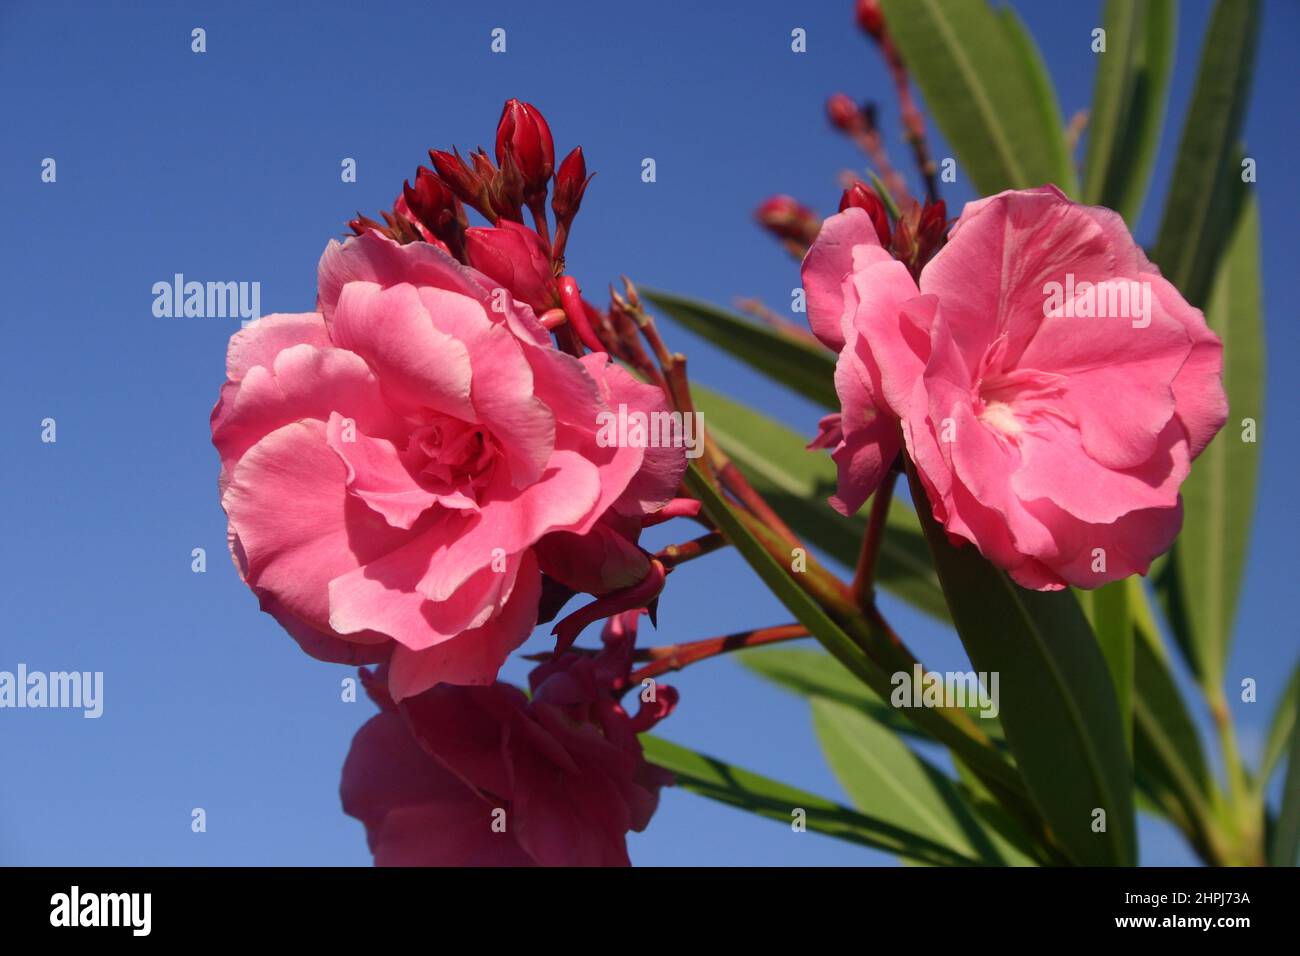 CLOSE-UP OF THE PINK FLOWERS OF THE OLEANDER (NERIUM) BUSH OR SHRUB. NERIUM CONTAINS SEVERAL TOXIC COMPOUNDS AND IS CONSIDERED A POISONOUS PLANT. Stock Photo